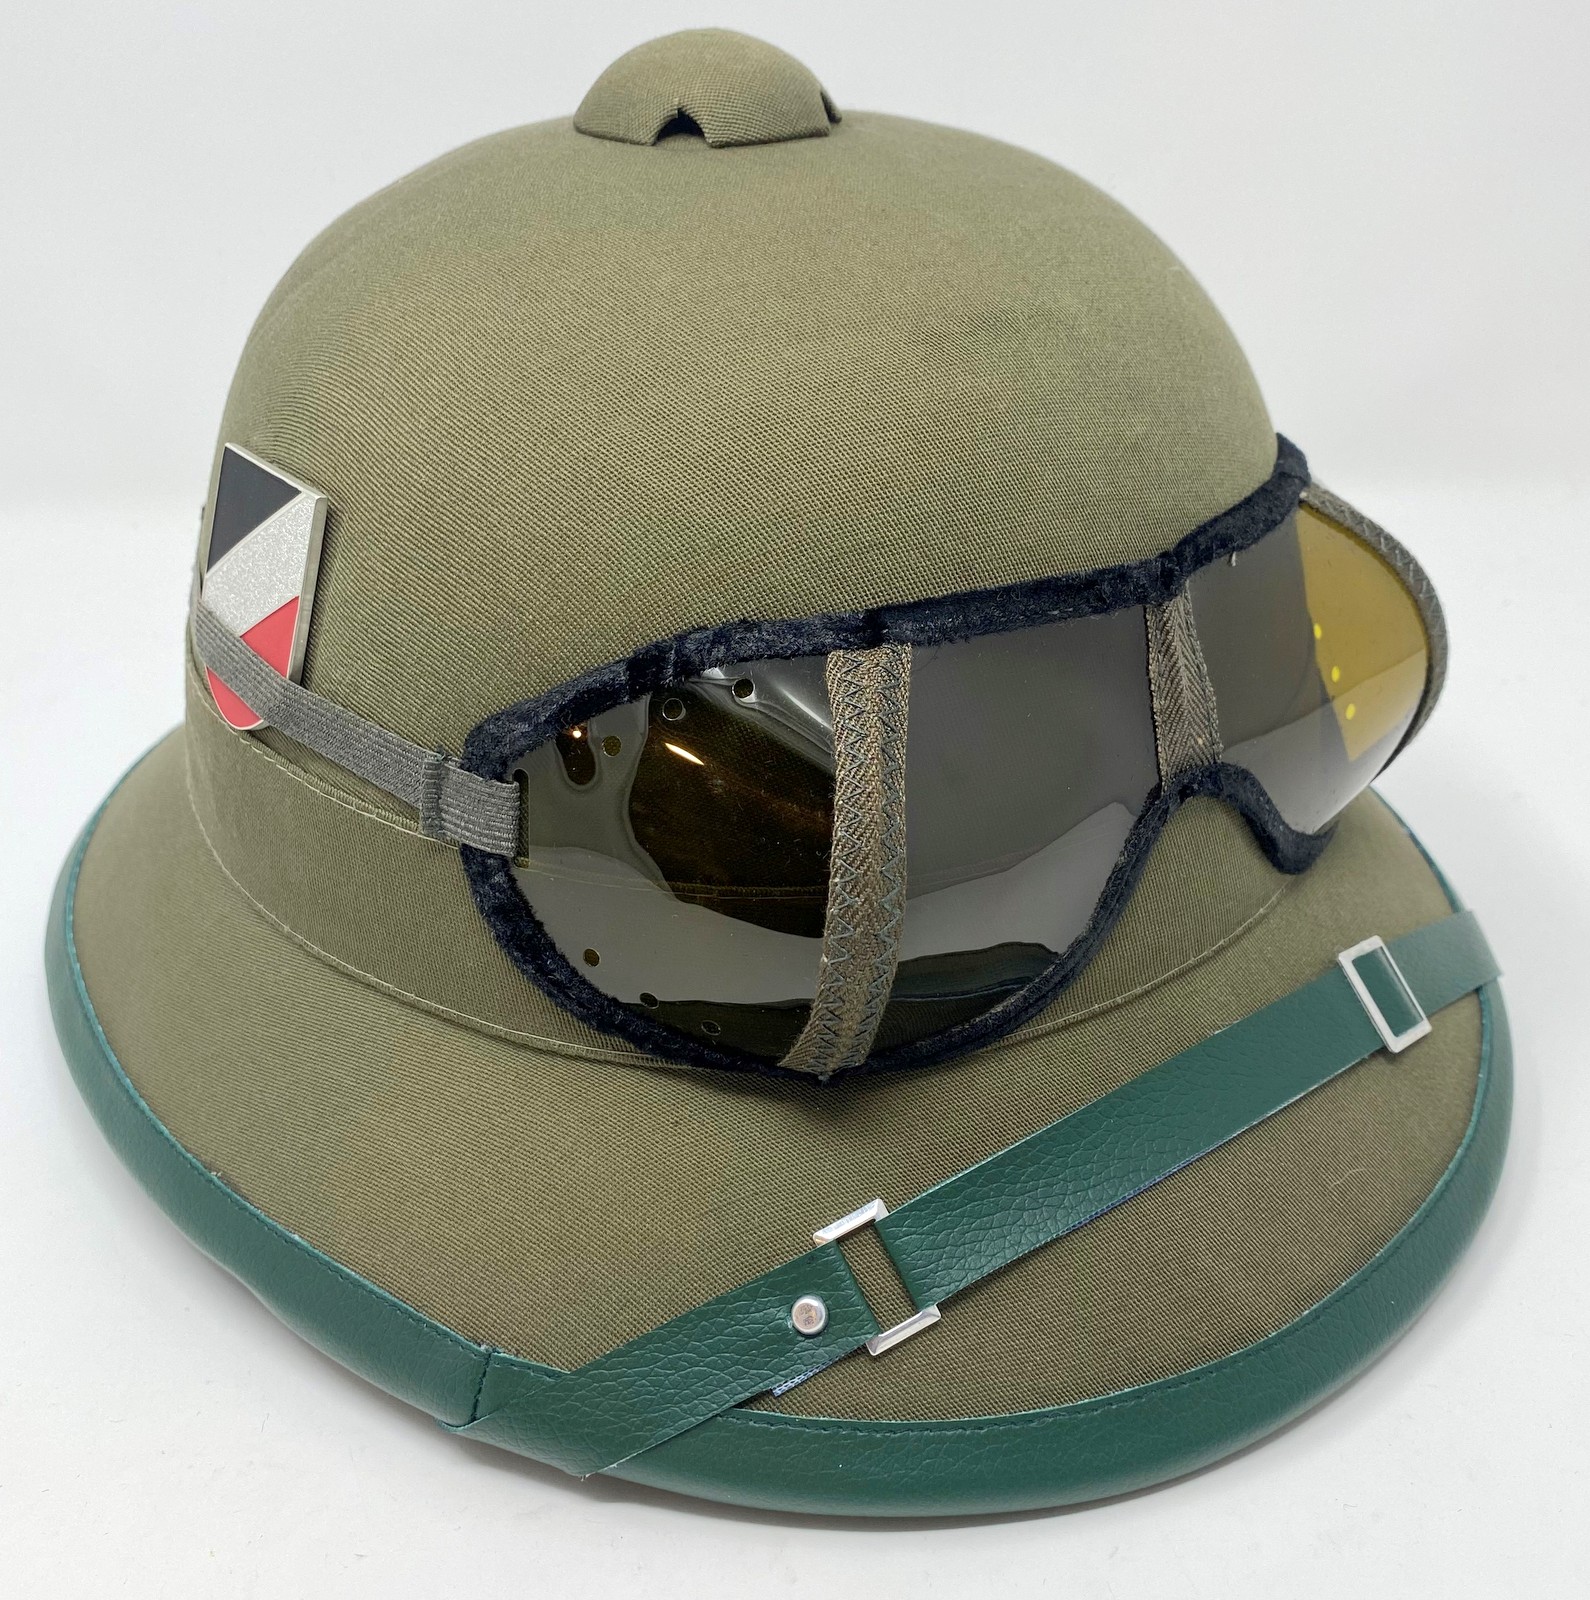 Sold at Auction: WWII NAZI GERMAN TROPICAL PITH HELMET 1942 DATED